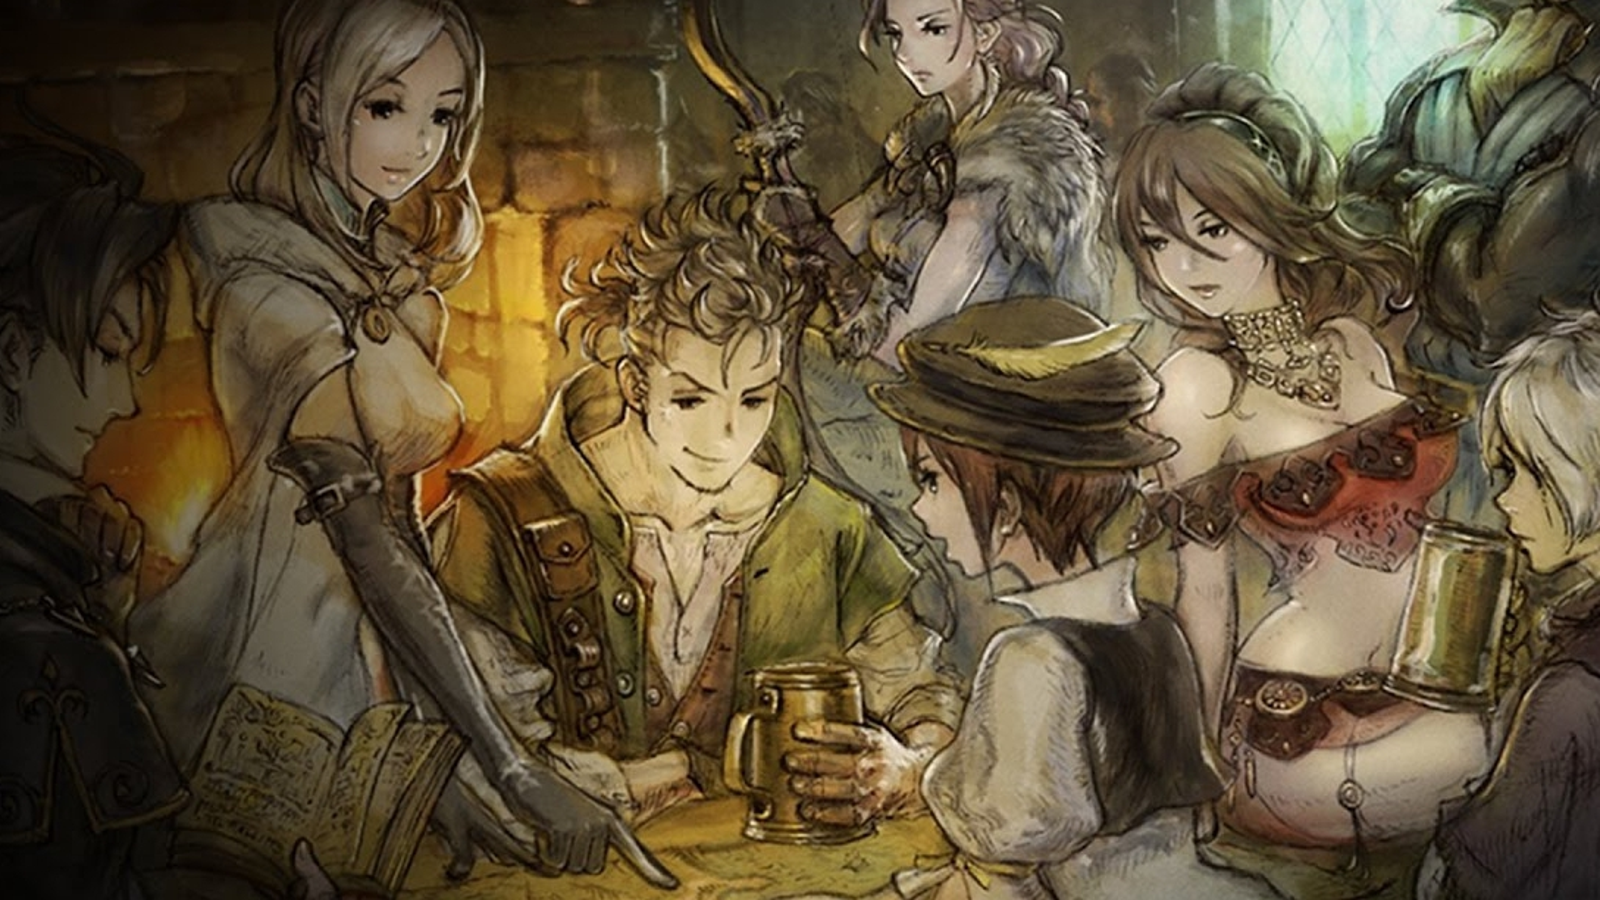 Octopath Traveler: Champions of the Continent Announces Bravely